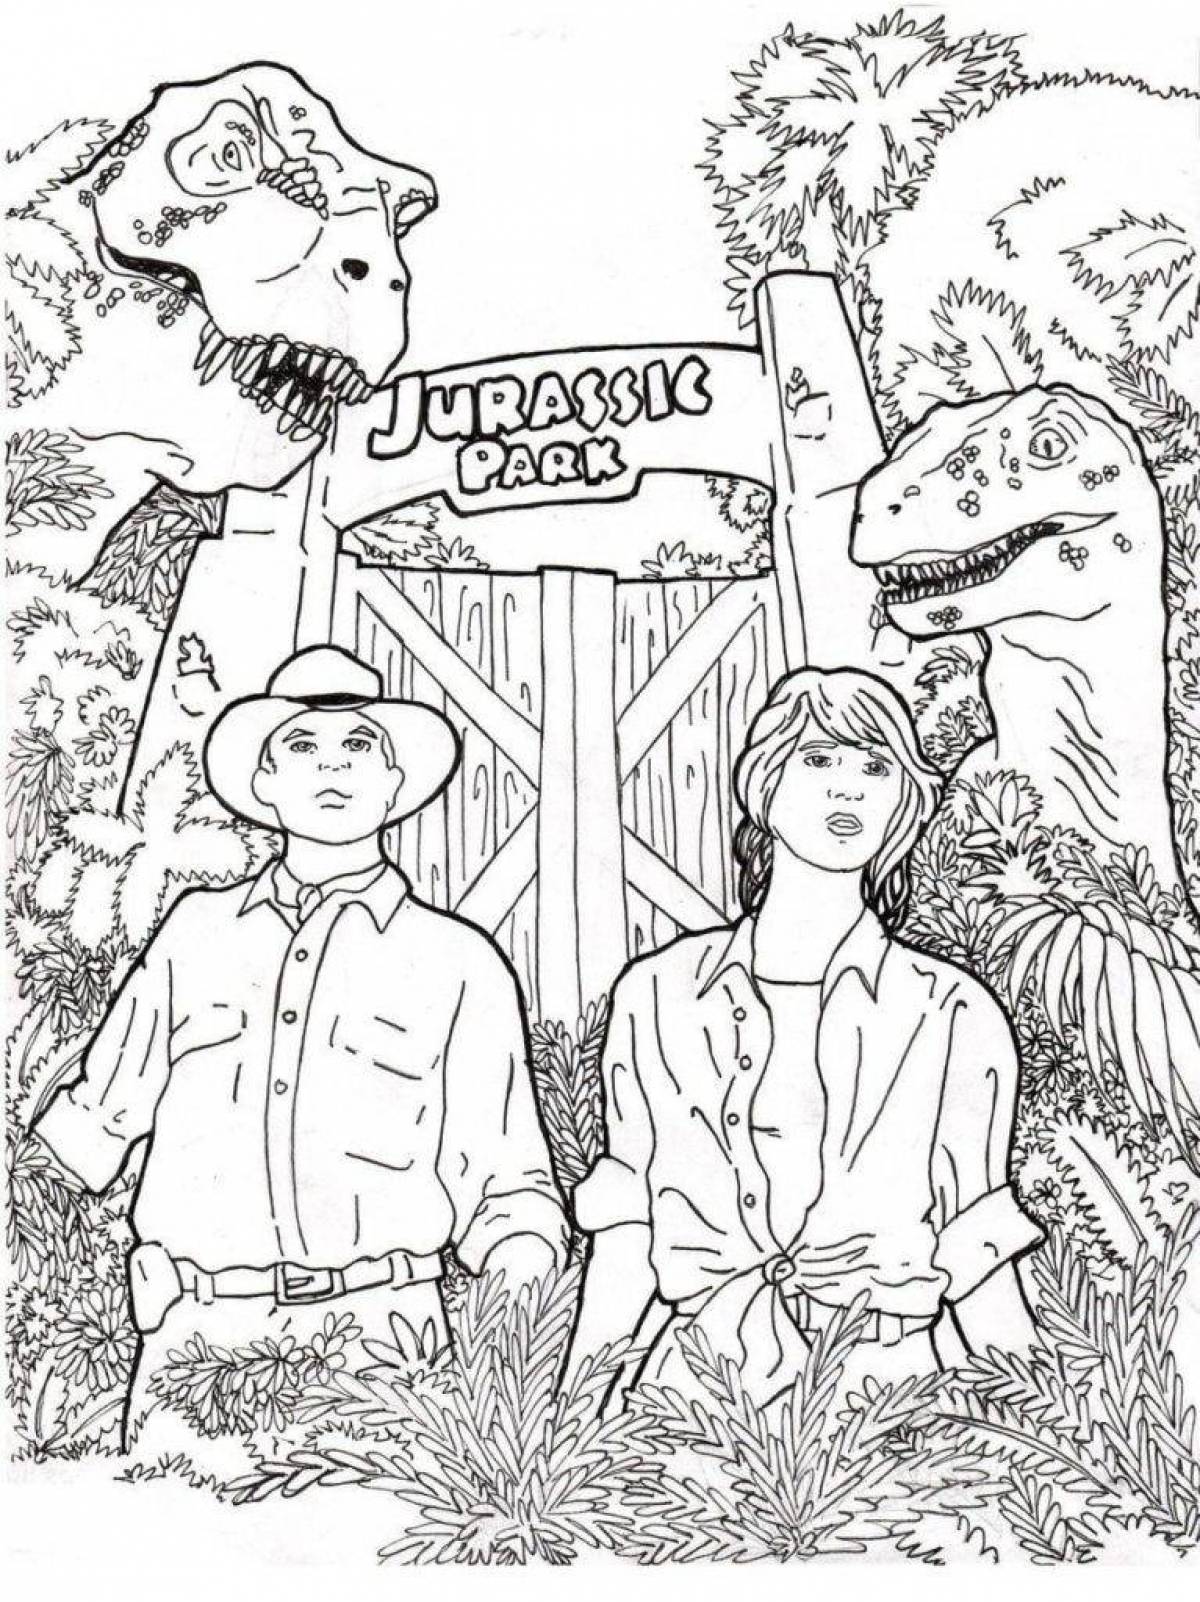 Playful jurassic coloring page